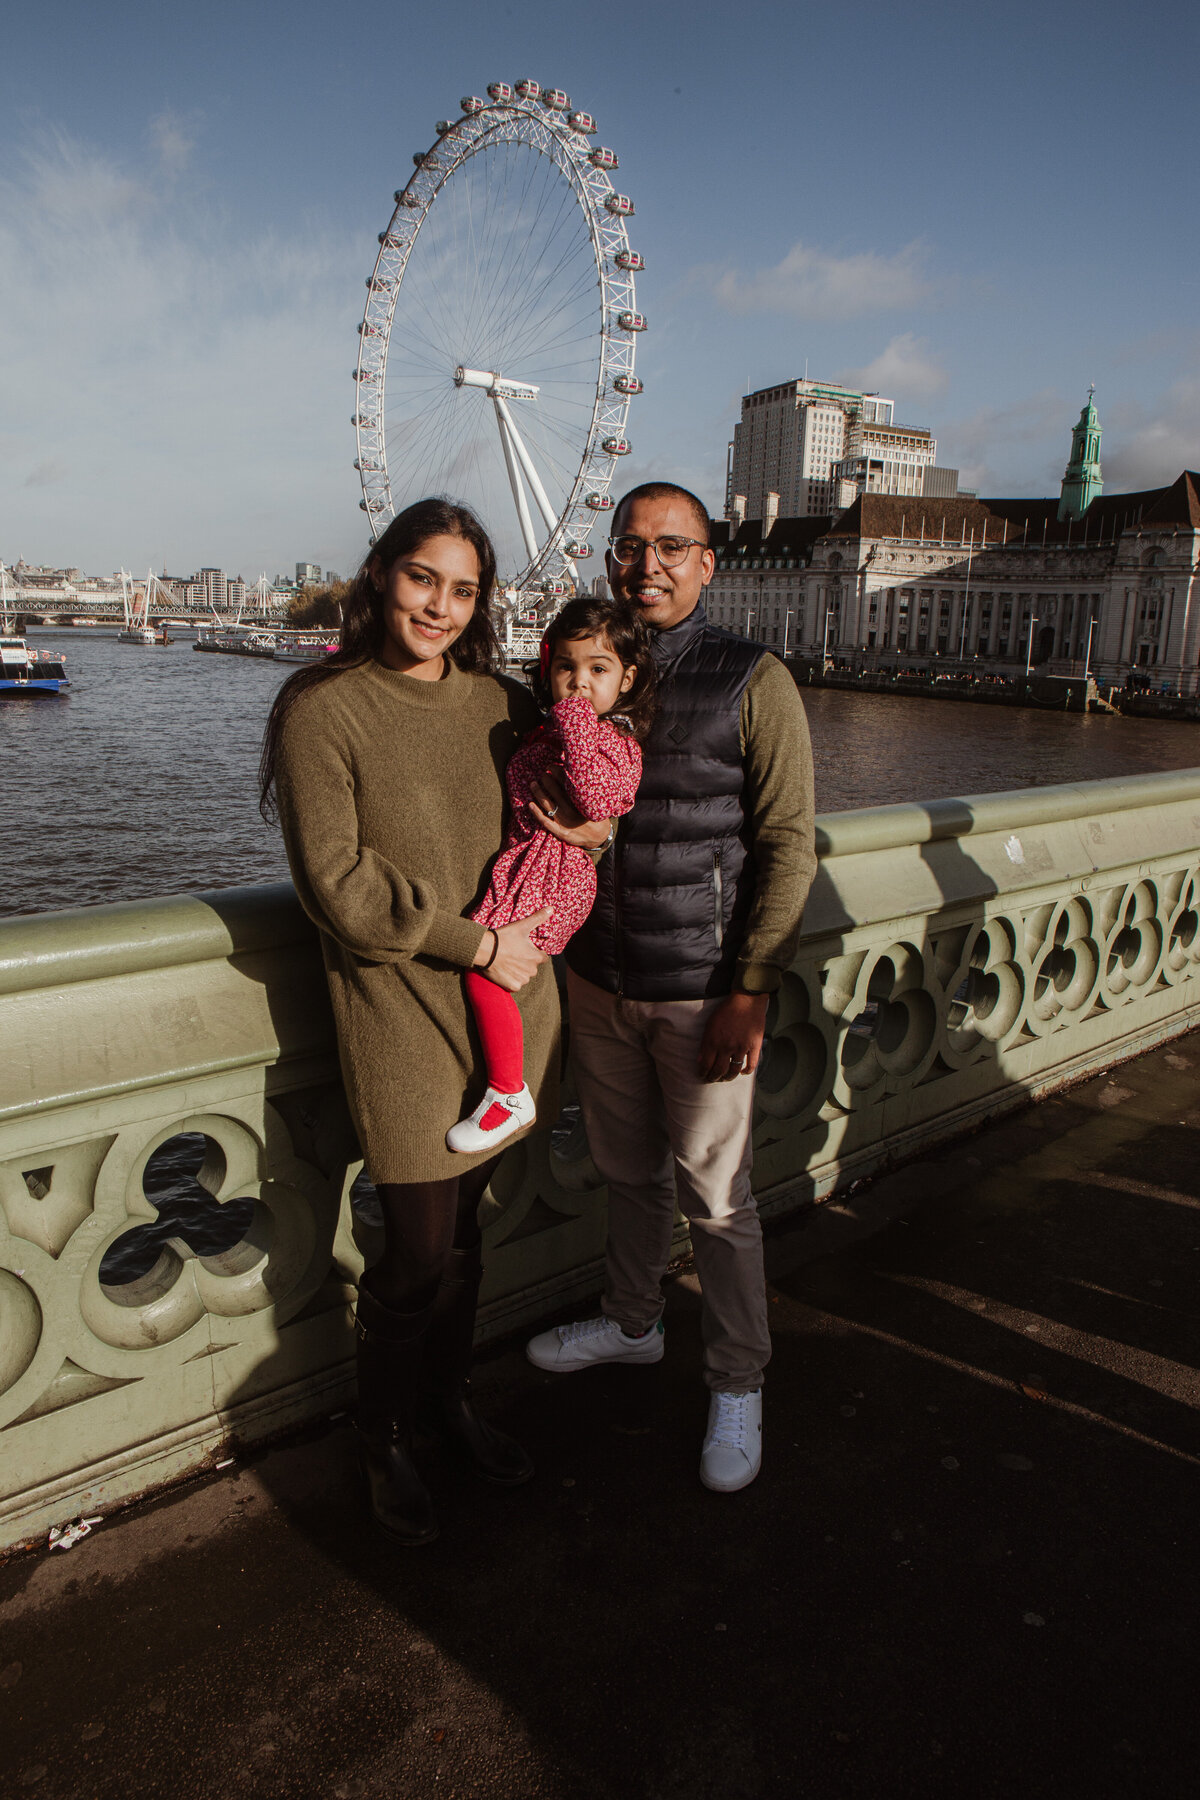 Perfect day sight seeing in London for this family photoshoot